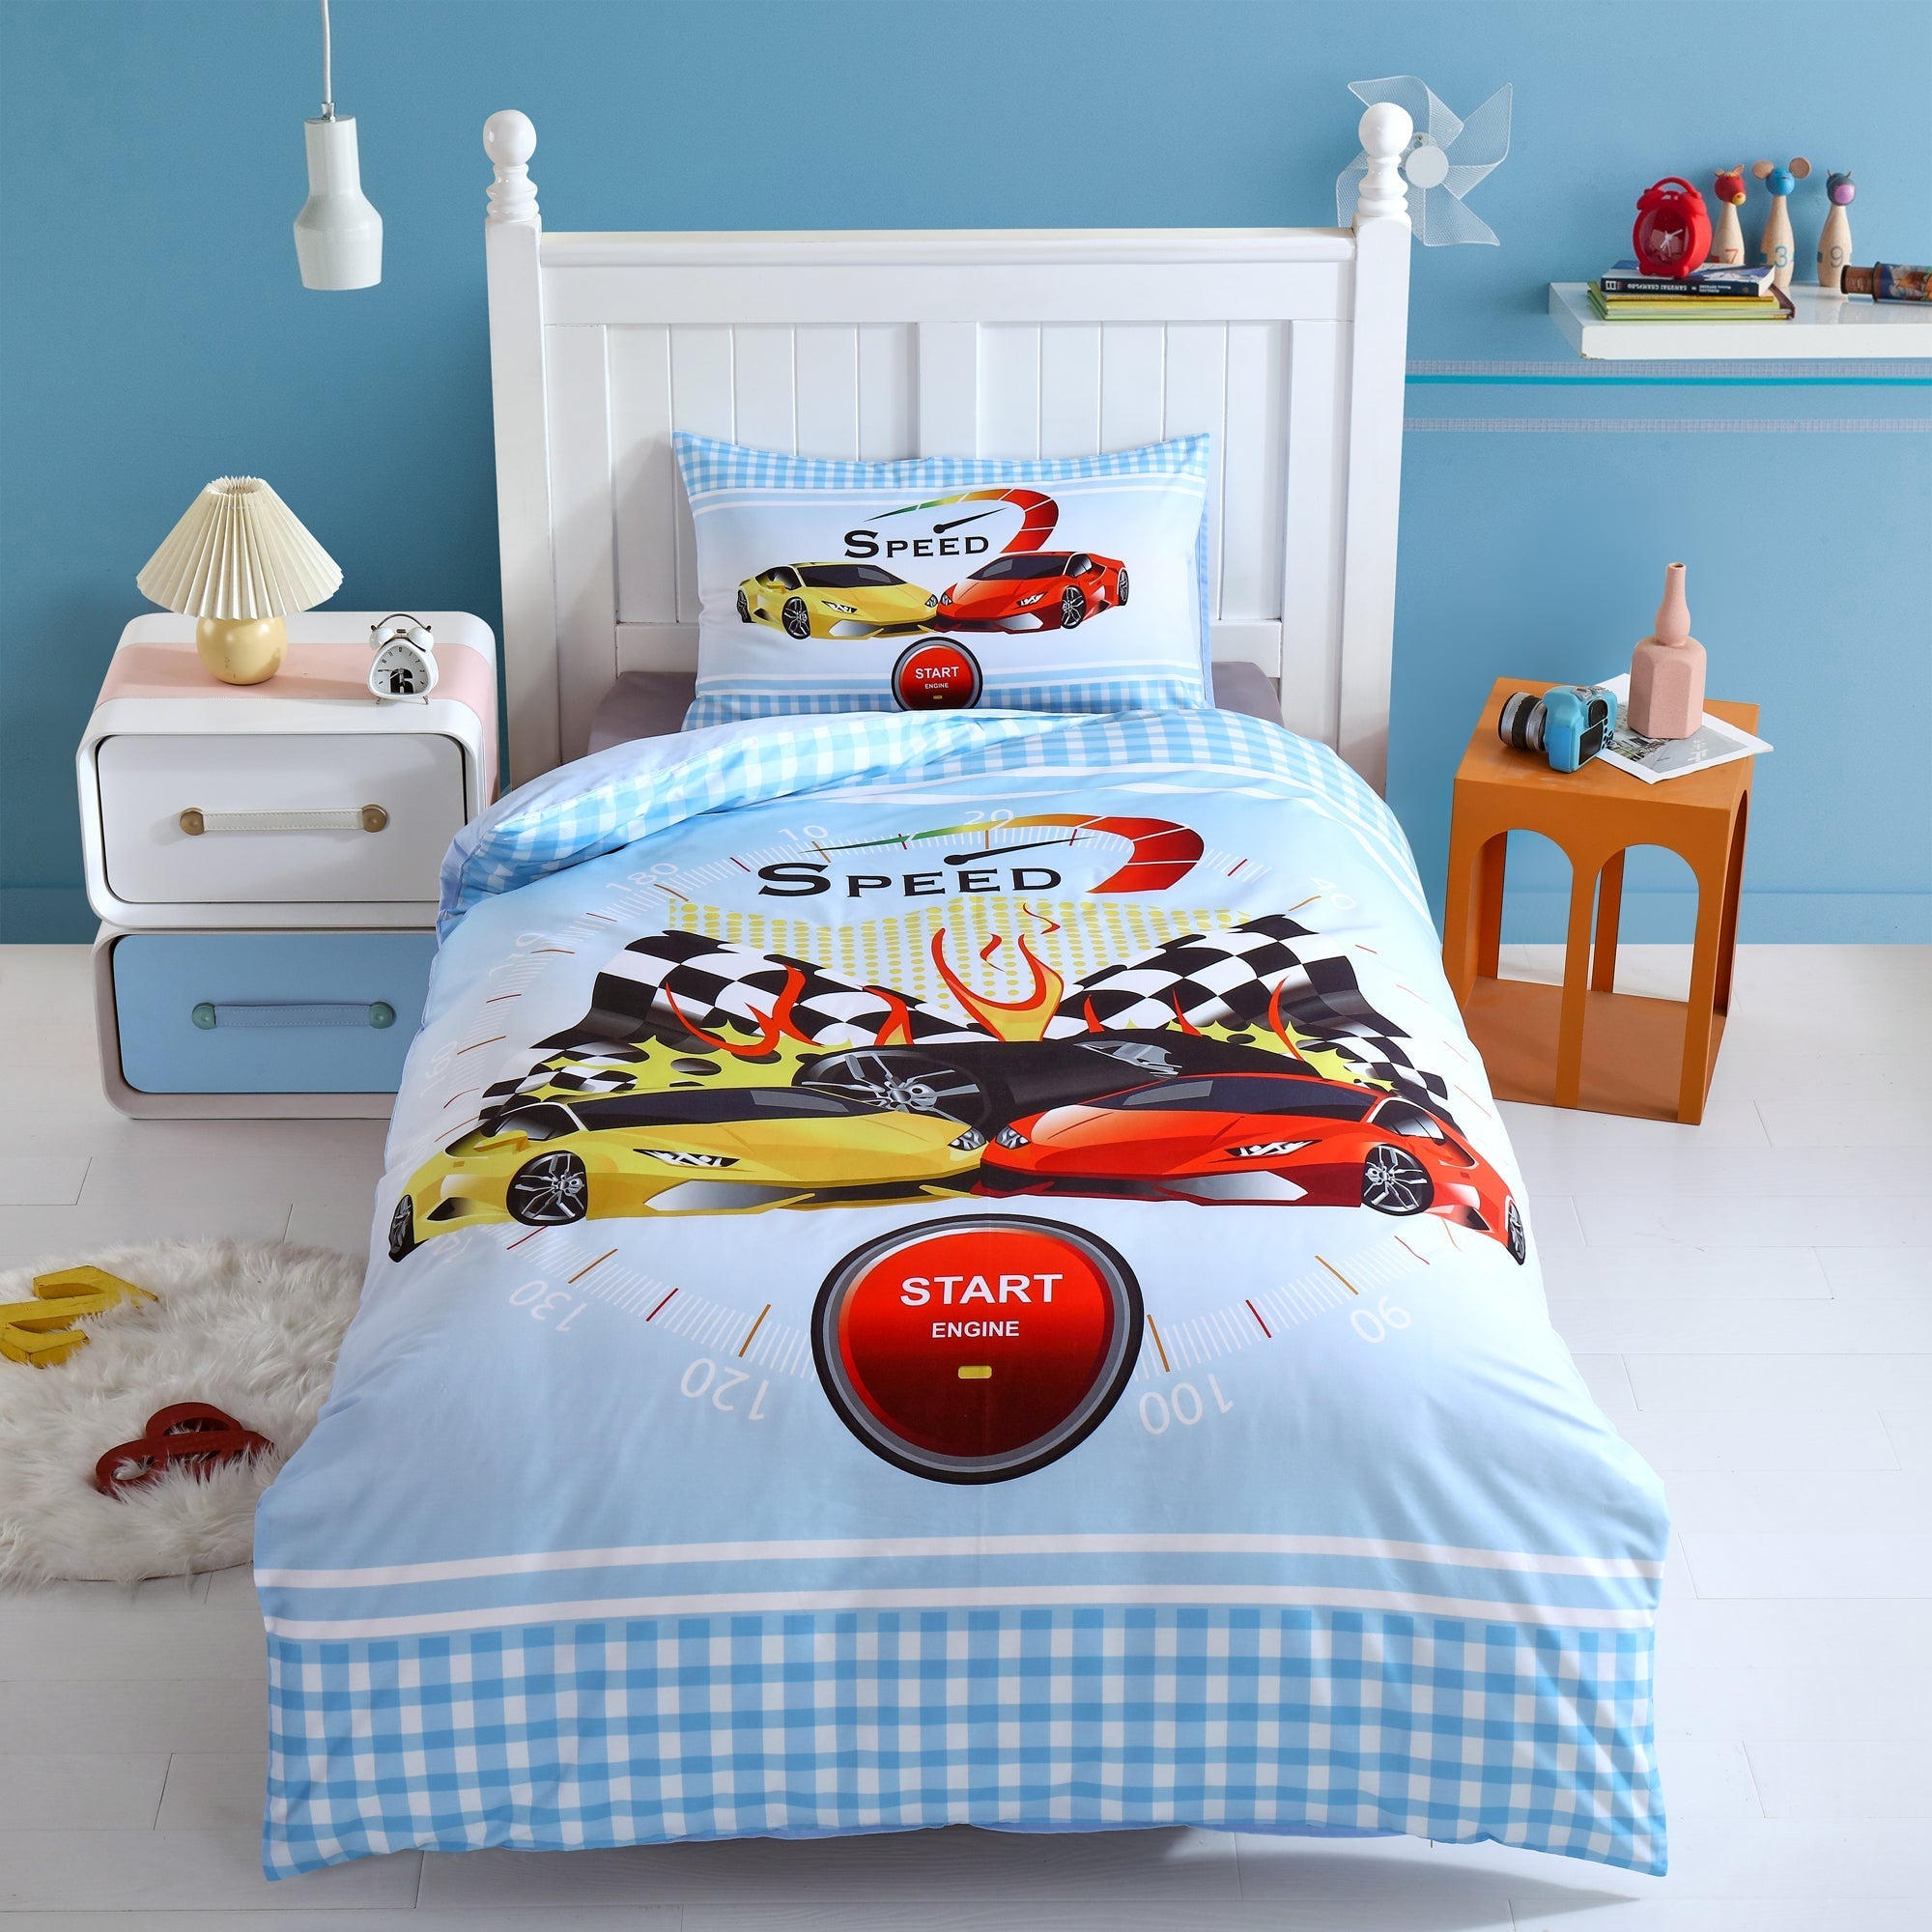 Single Size Kids Cotton Bedding Quilt Cover with Pillow Case - Yellow Red Car